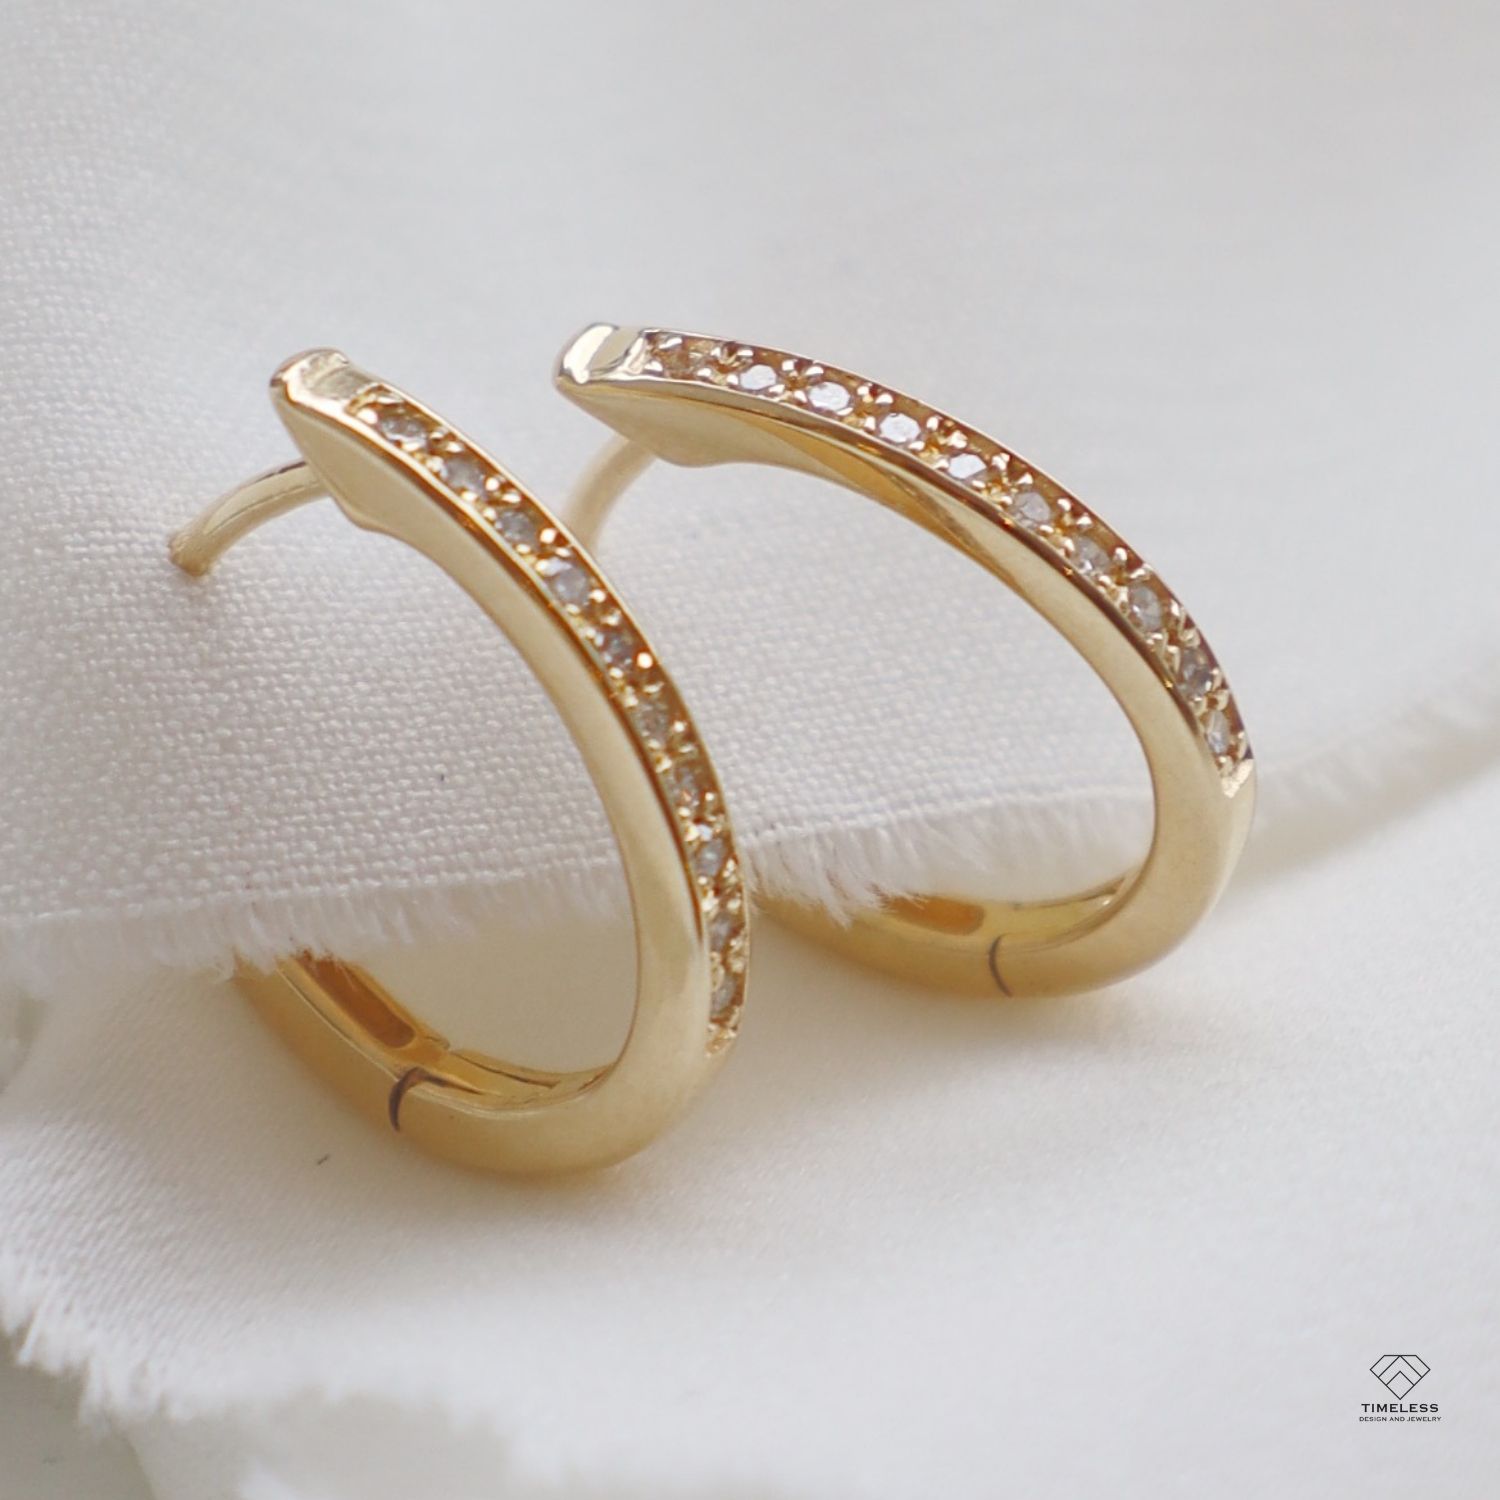 Custom Gold Earrings in Salt Lake City by Timeless Design and Jewelry